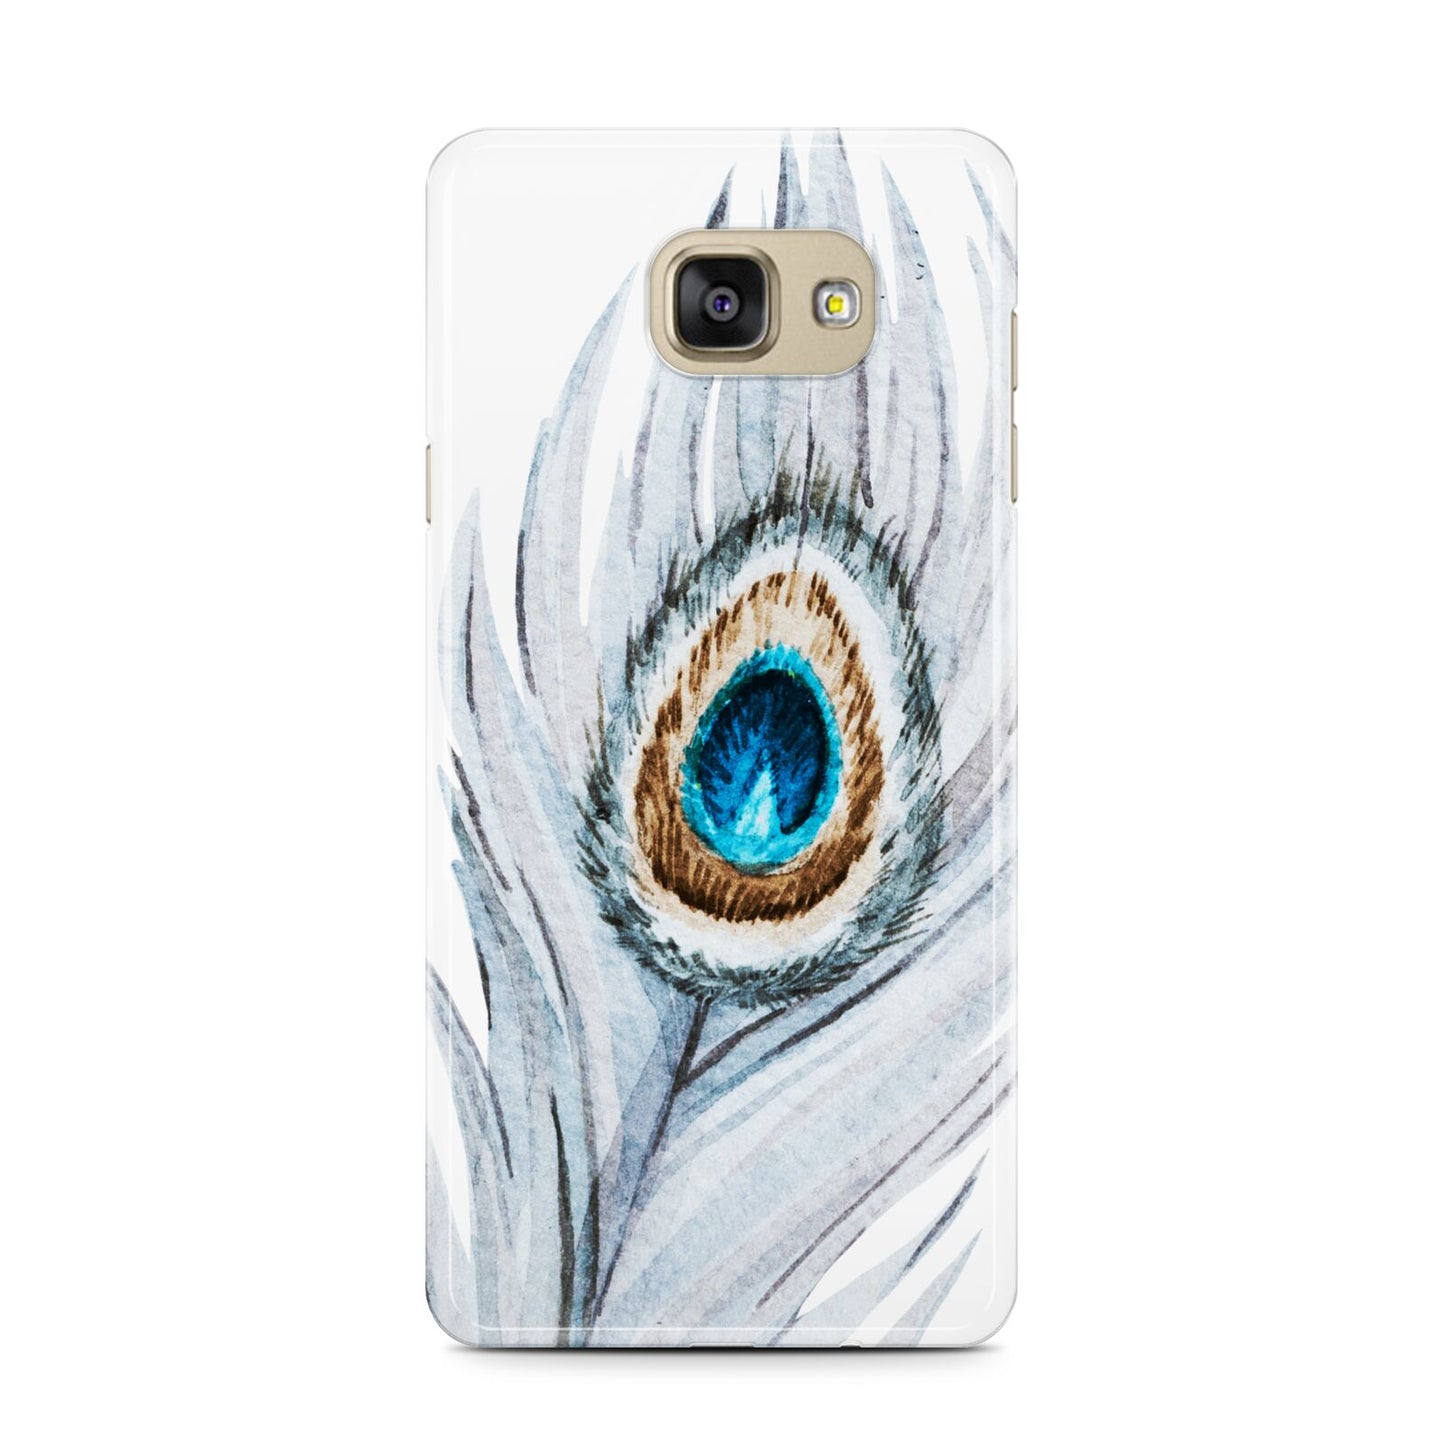 Peacock Samsung Galaxy A7 2016 Case on gold phone